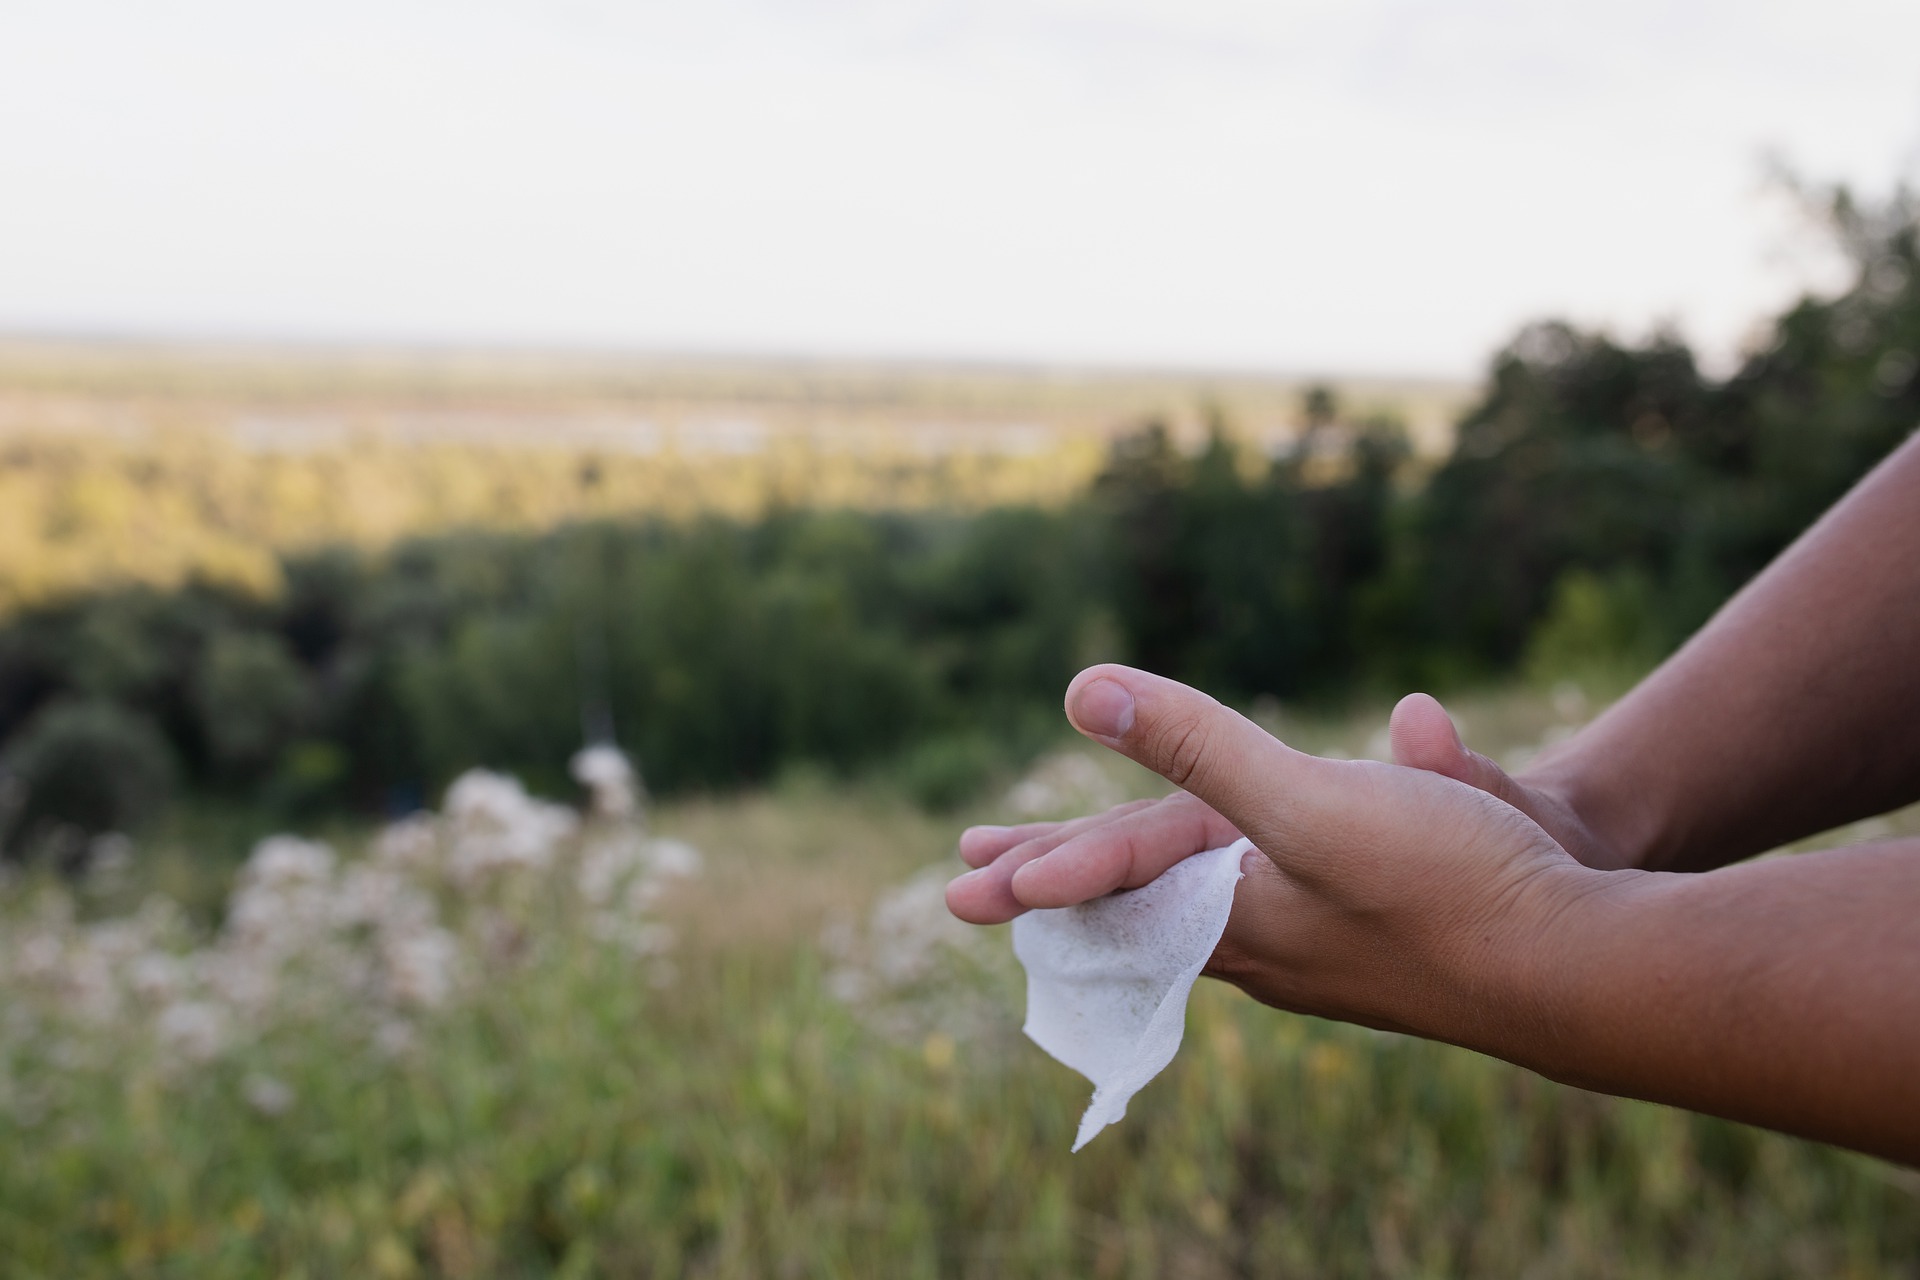 Is it feasible to ban plastic in wet wipes?